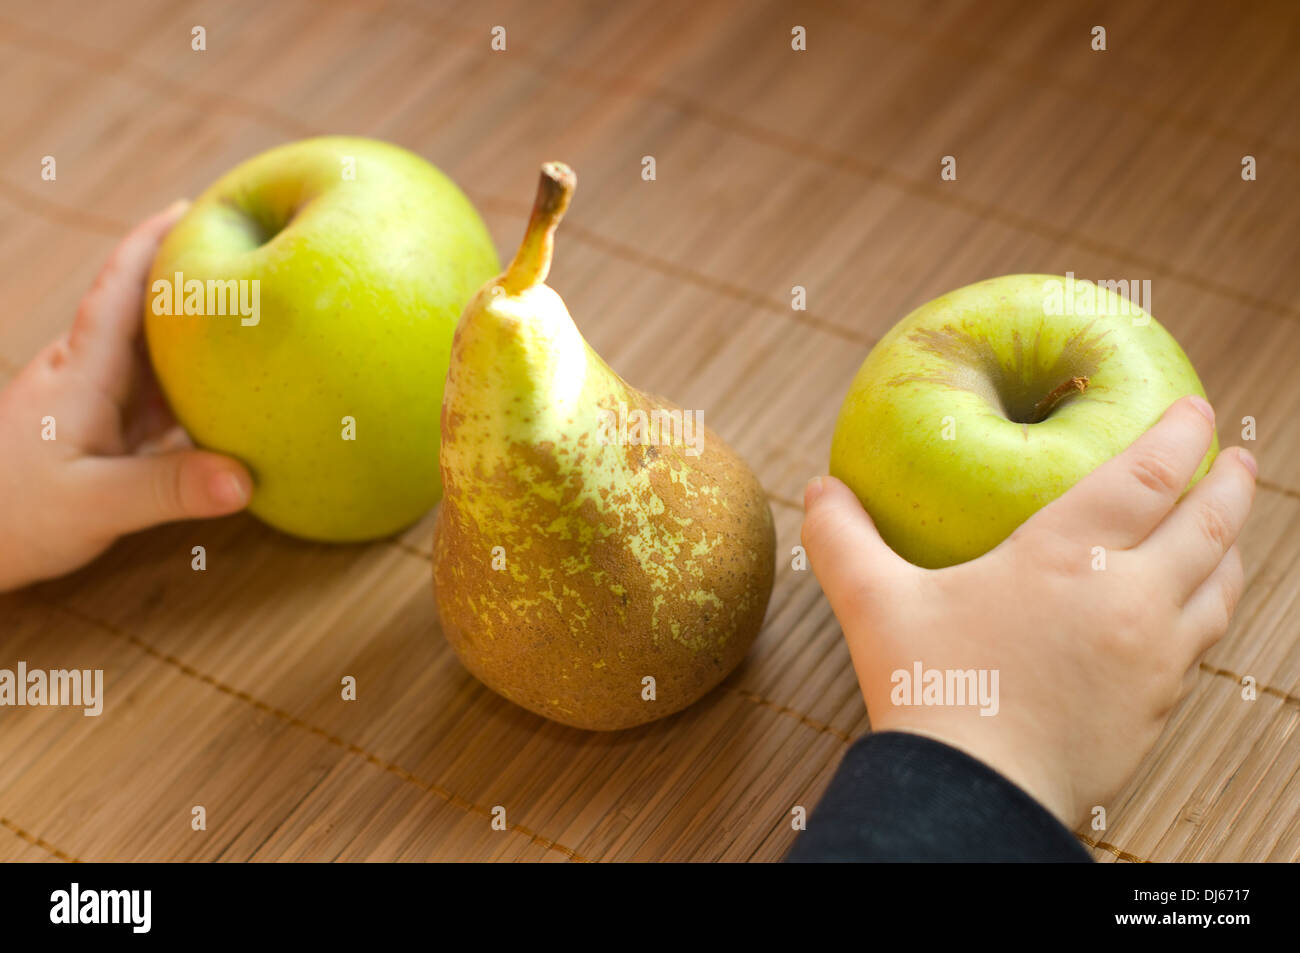 Baby hands catching two apples from the table Stock Photo